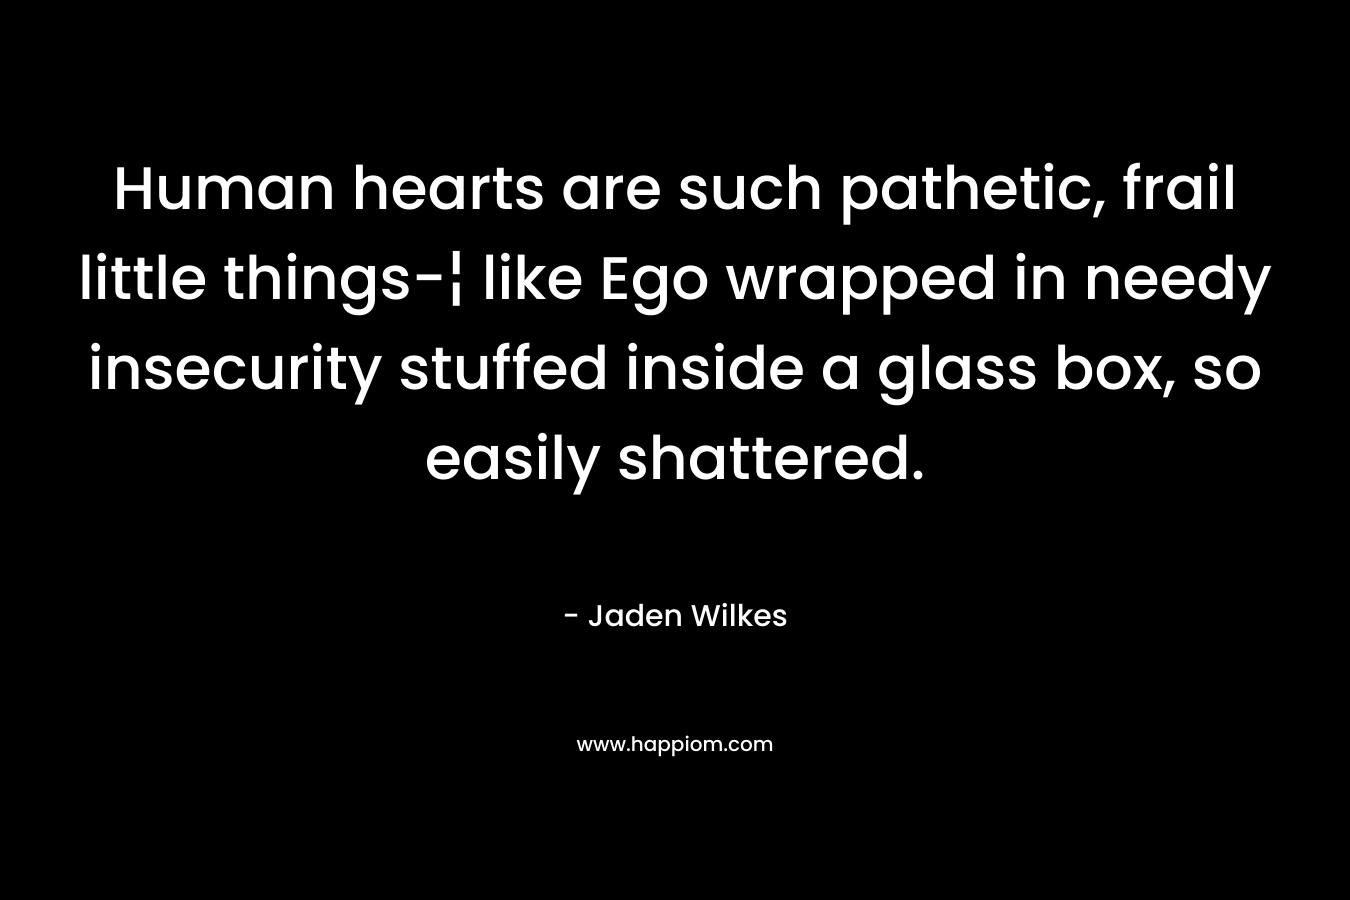 Human hearts are such pathetic, frail little things-¦ like Ego wrapped in needy insecurity stuffed inside a glass box, so easily shattered. – Jaden Wilkes